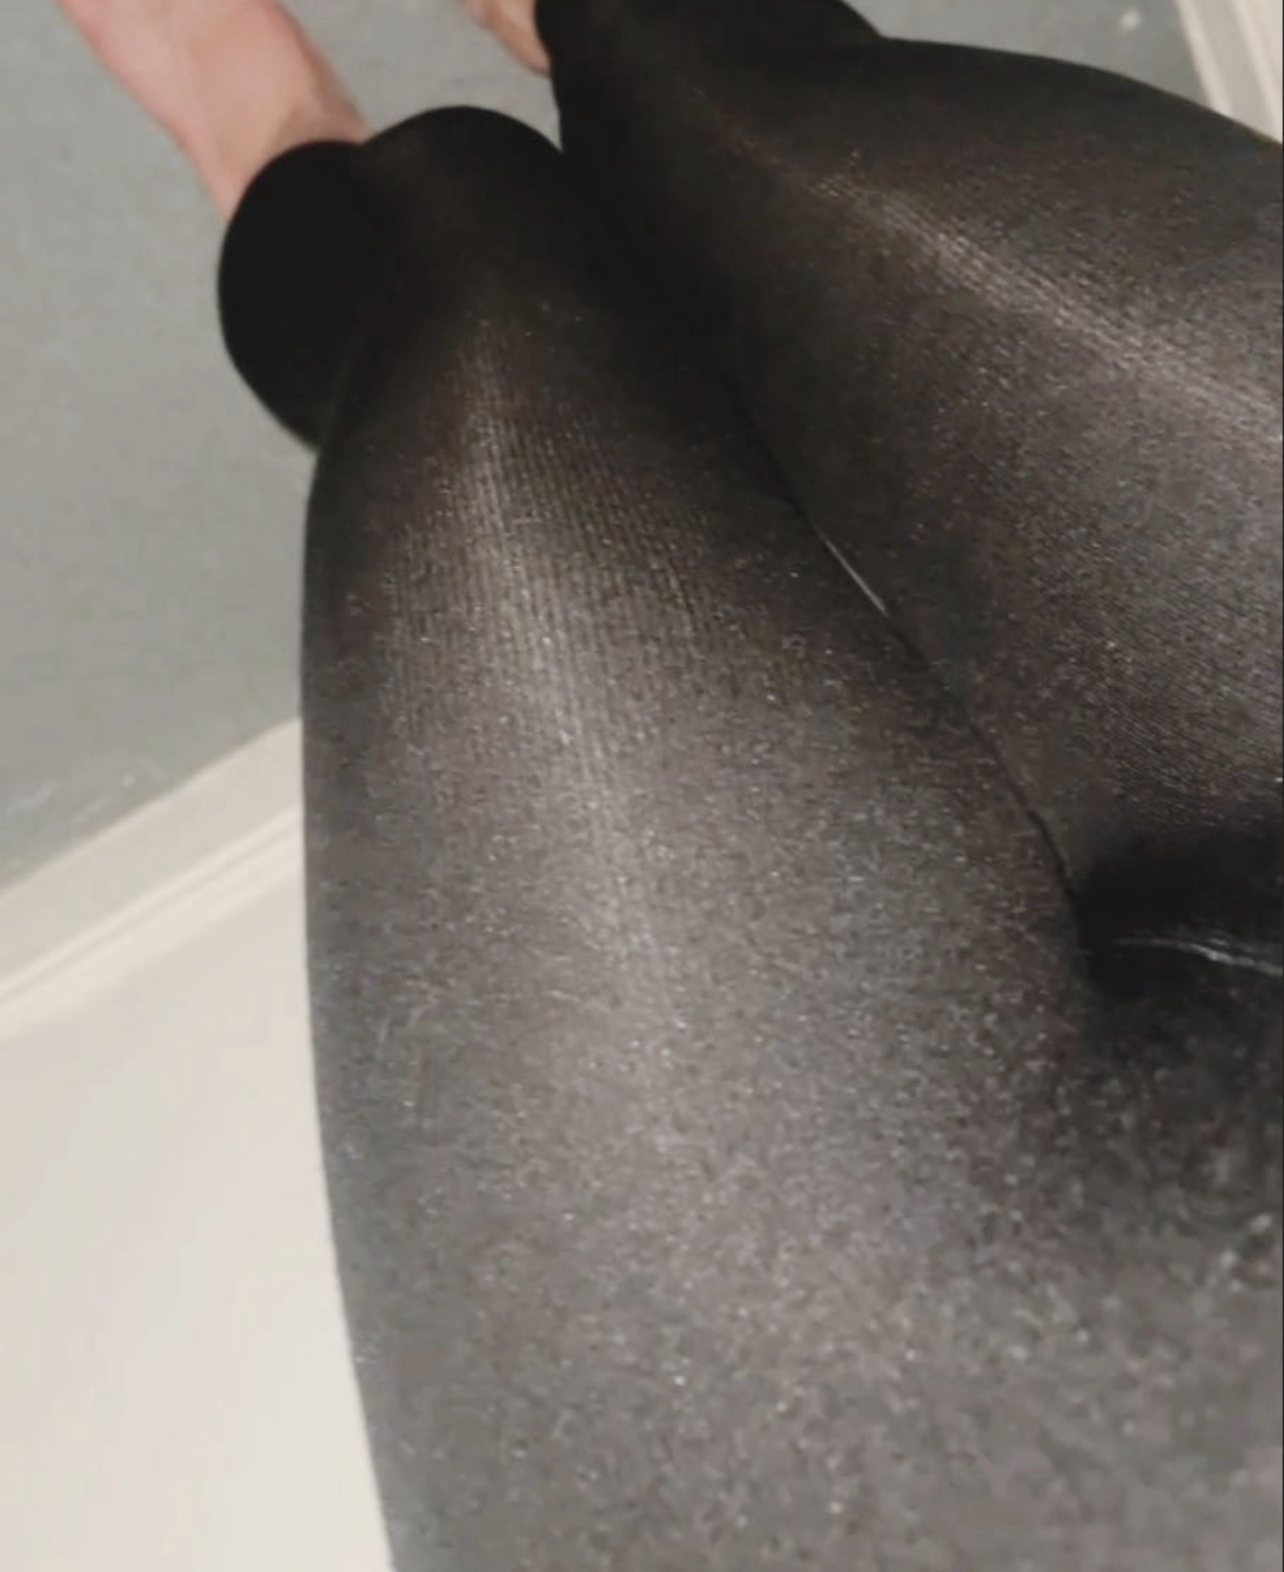 Skinny twink shows ass pantyhose